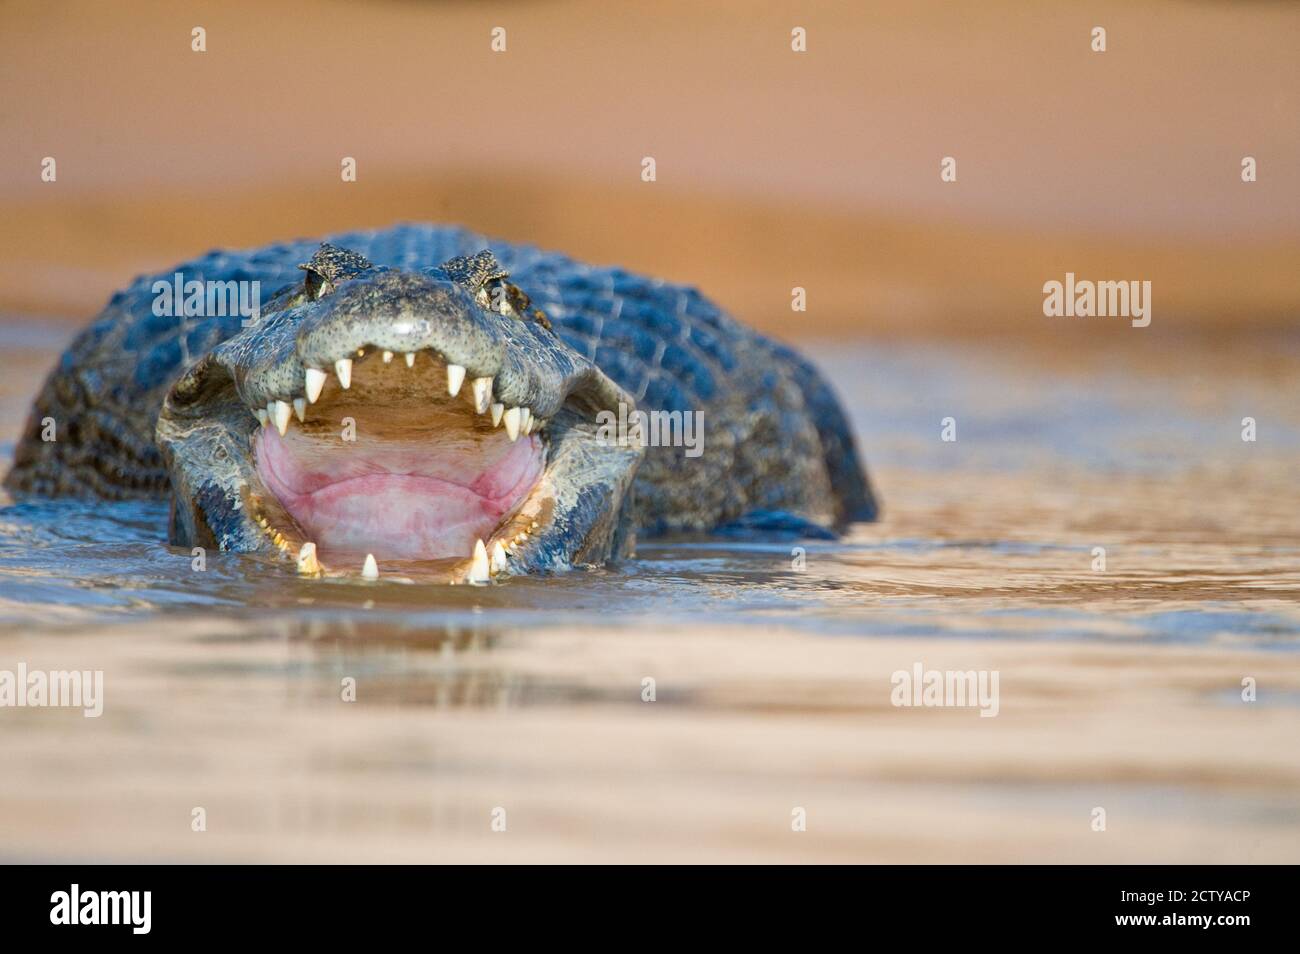 Yacare caiman (Caiman crocodilus yacare) in a river, Three Brothers River, Meeting of the Waters State Park, Pantanal Wetlands, Brazil Stock Photo